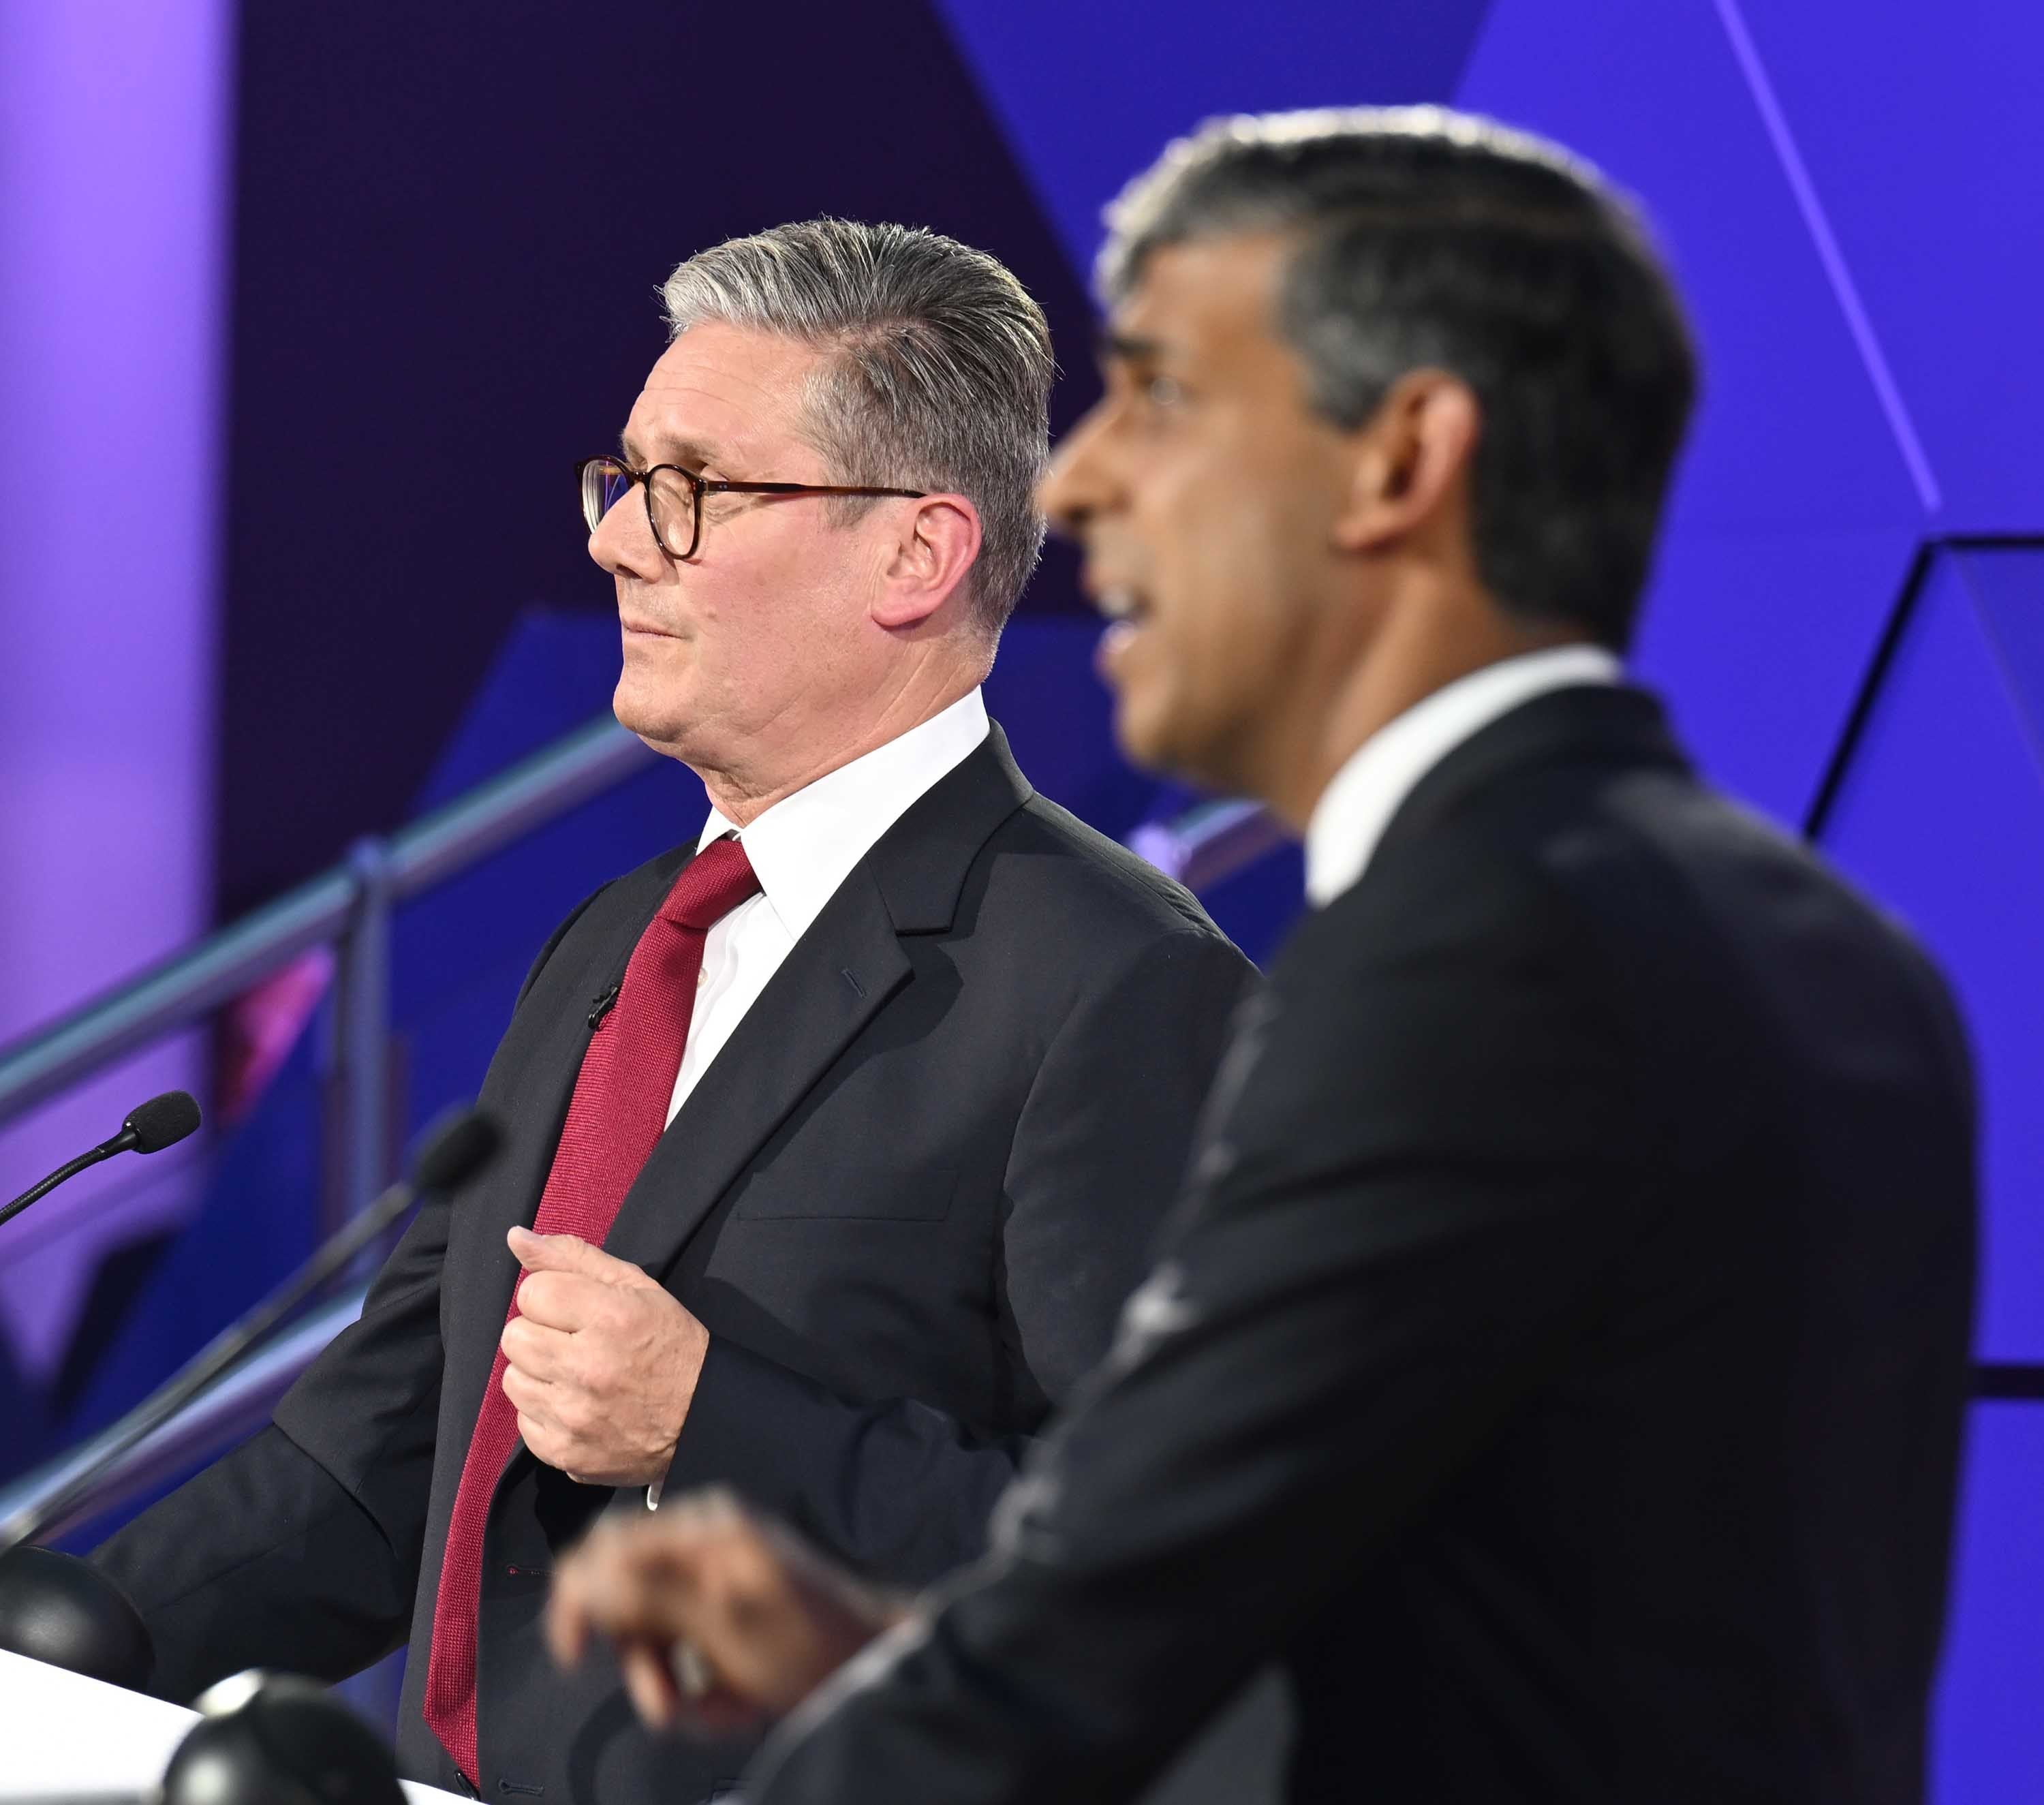 Sir Keir Starmer, left, has criticised ‘unfunded’ pledges made by Prime Minister Rishi Sunak (Jeff Overs/BBC/PA)